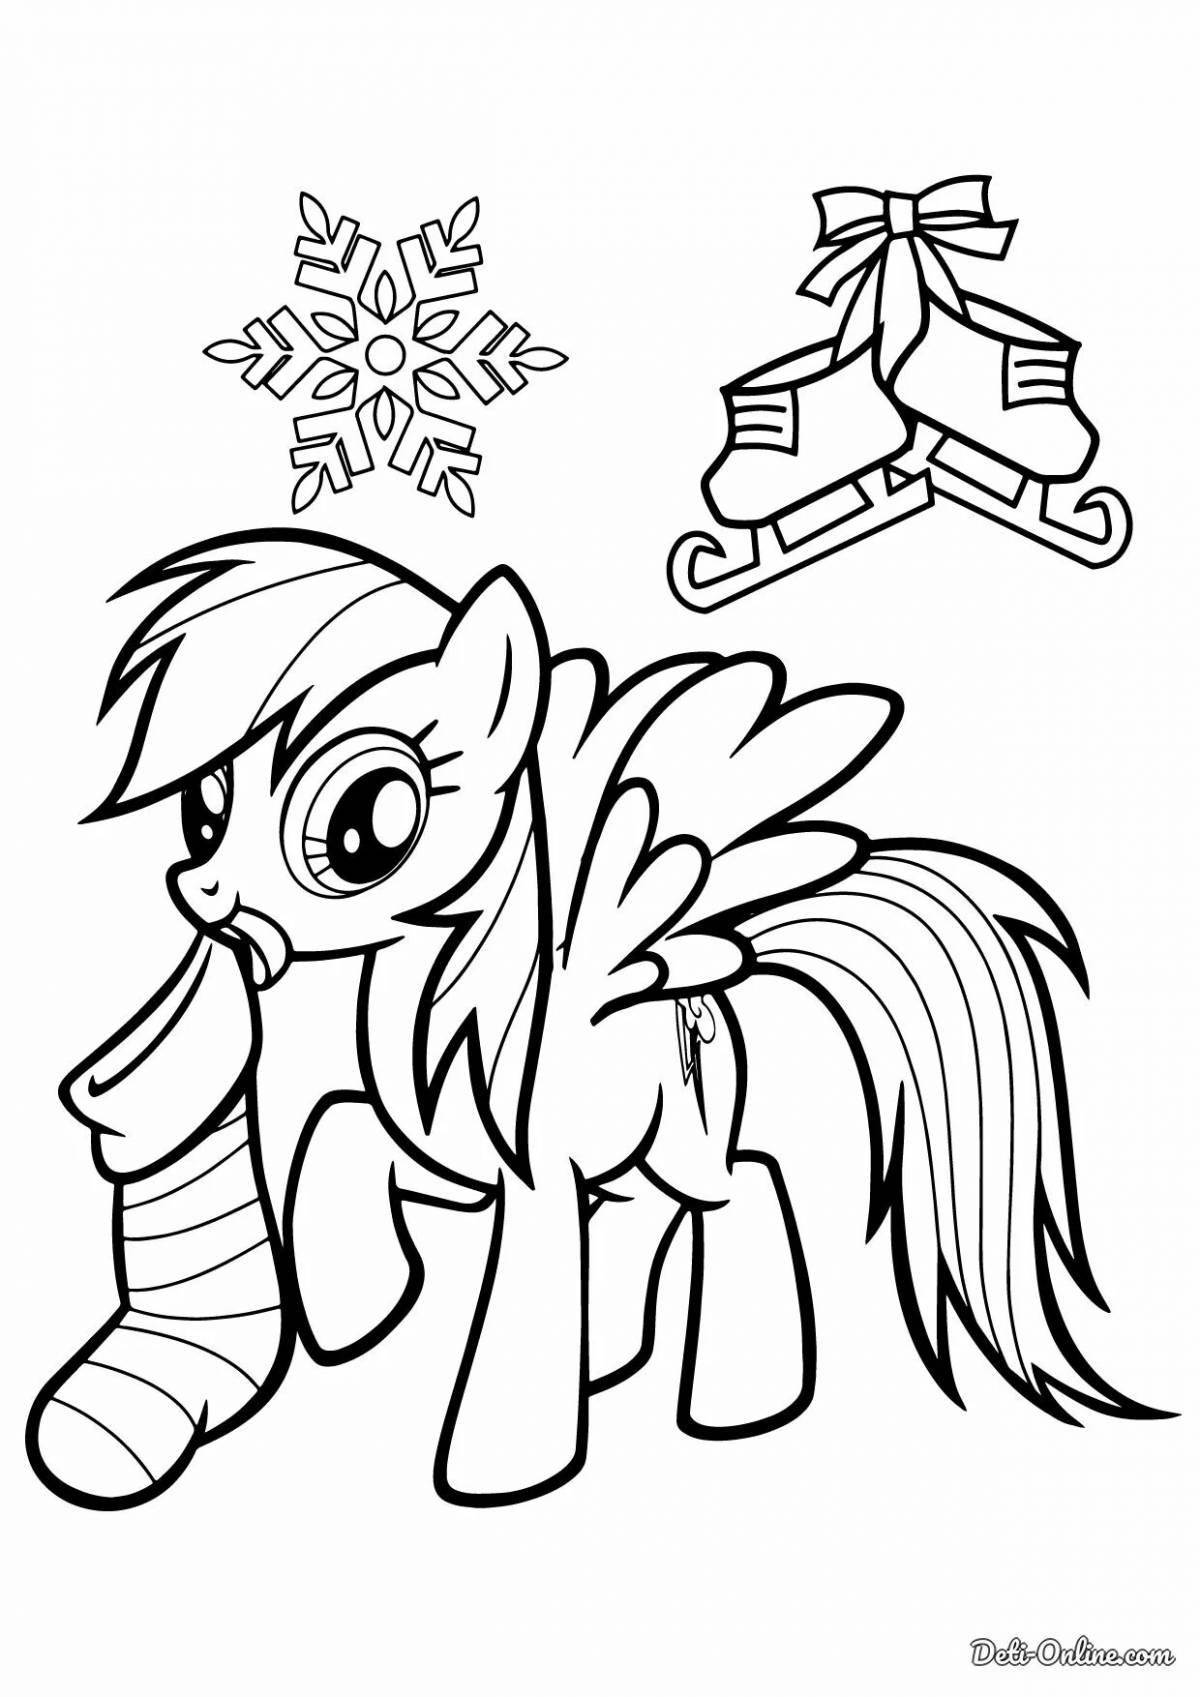 Glowing Christmas pony coloring page